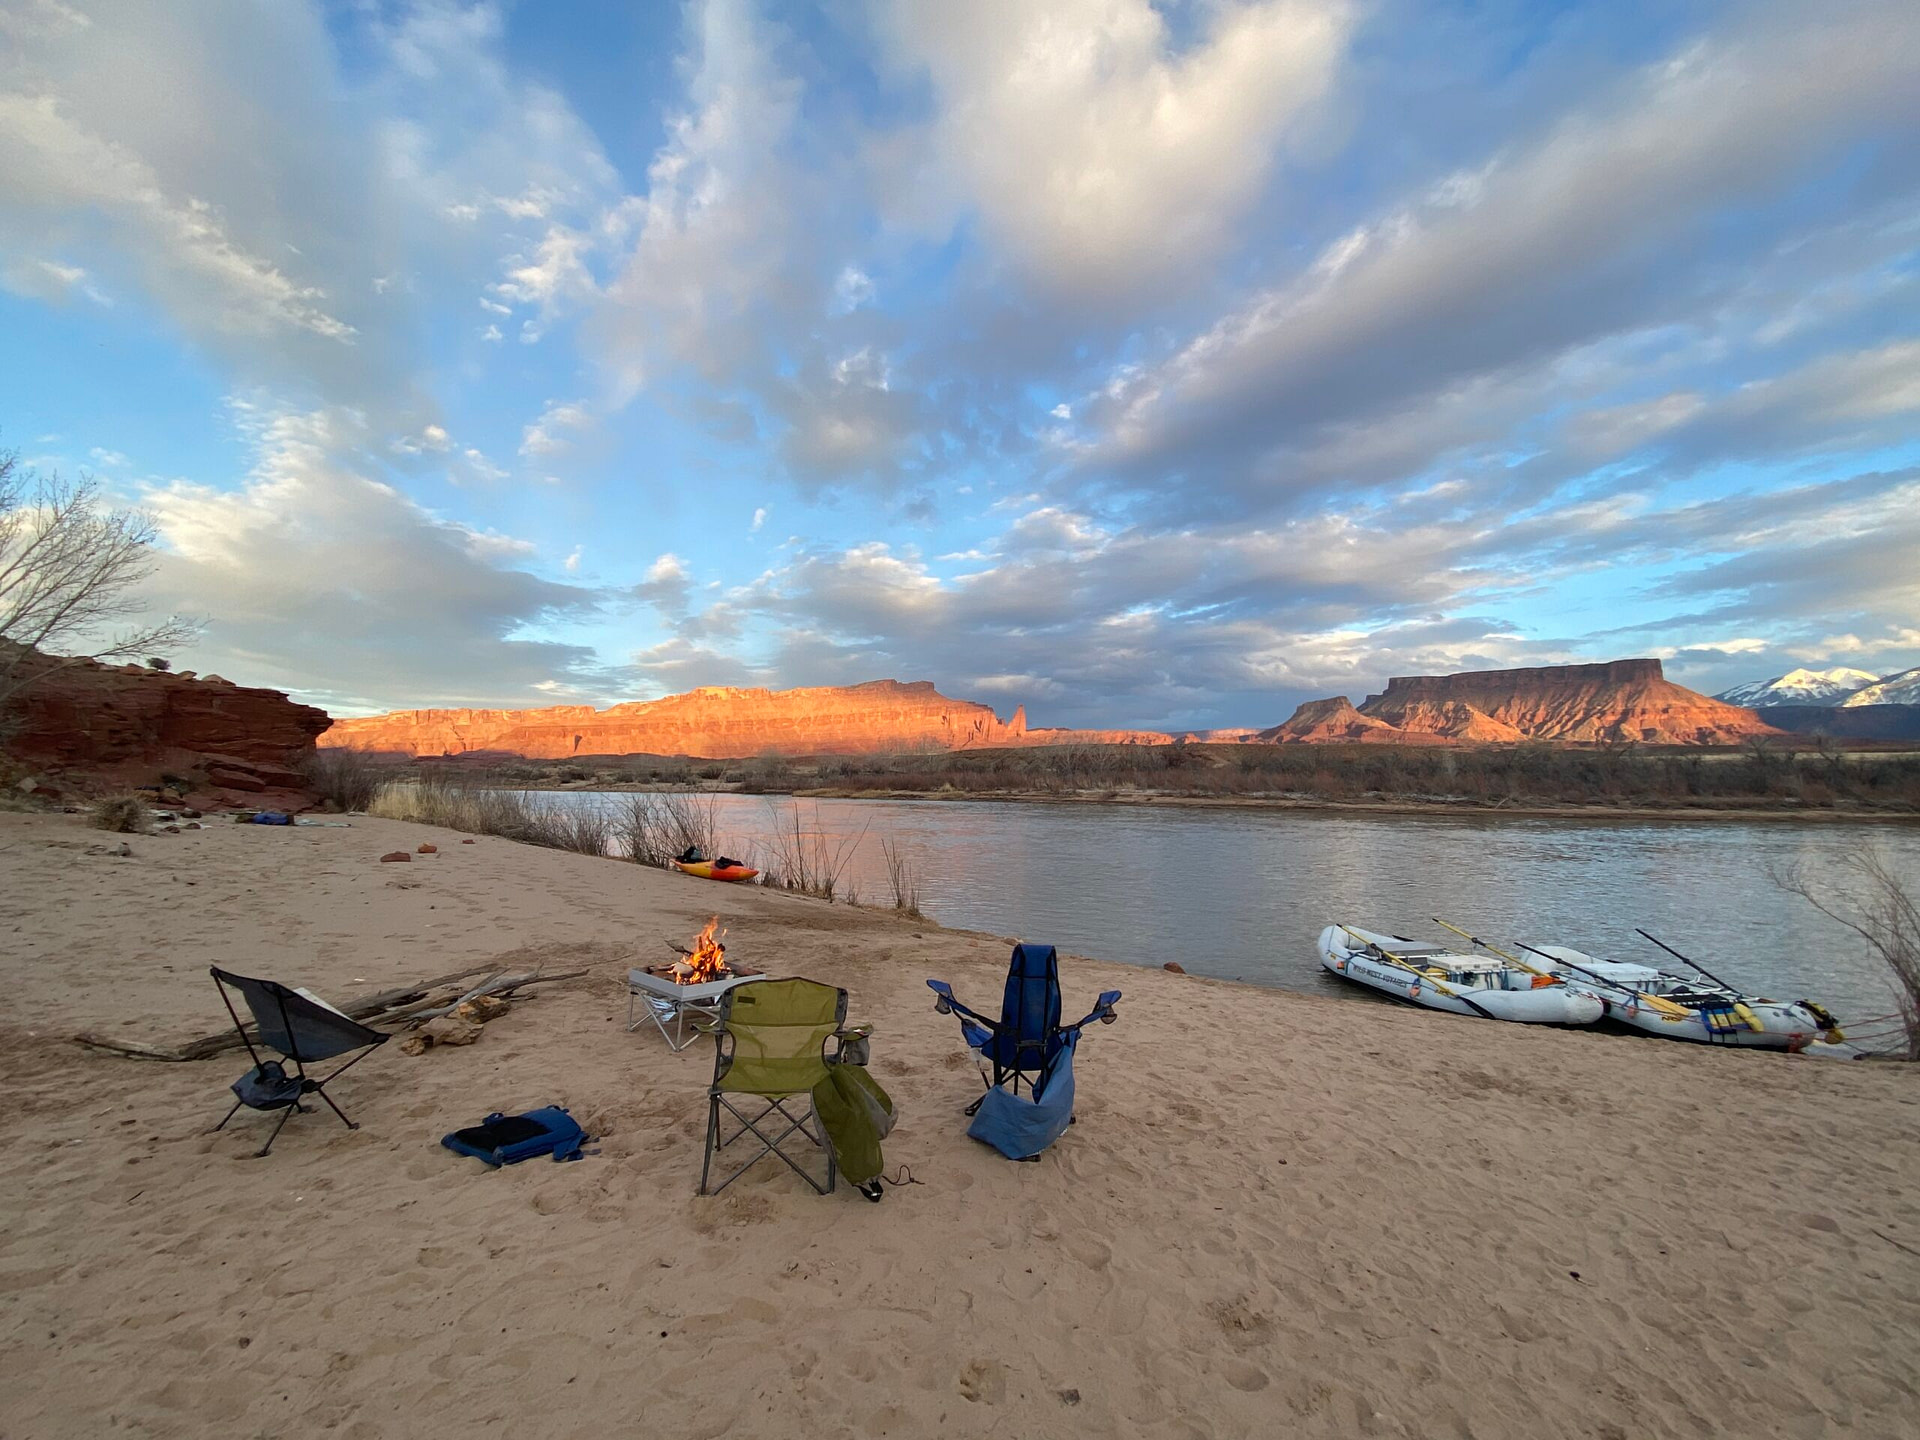 TWO-DAY COLORADO RIVER RAFTING AND CAMPING TRIP